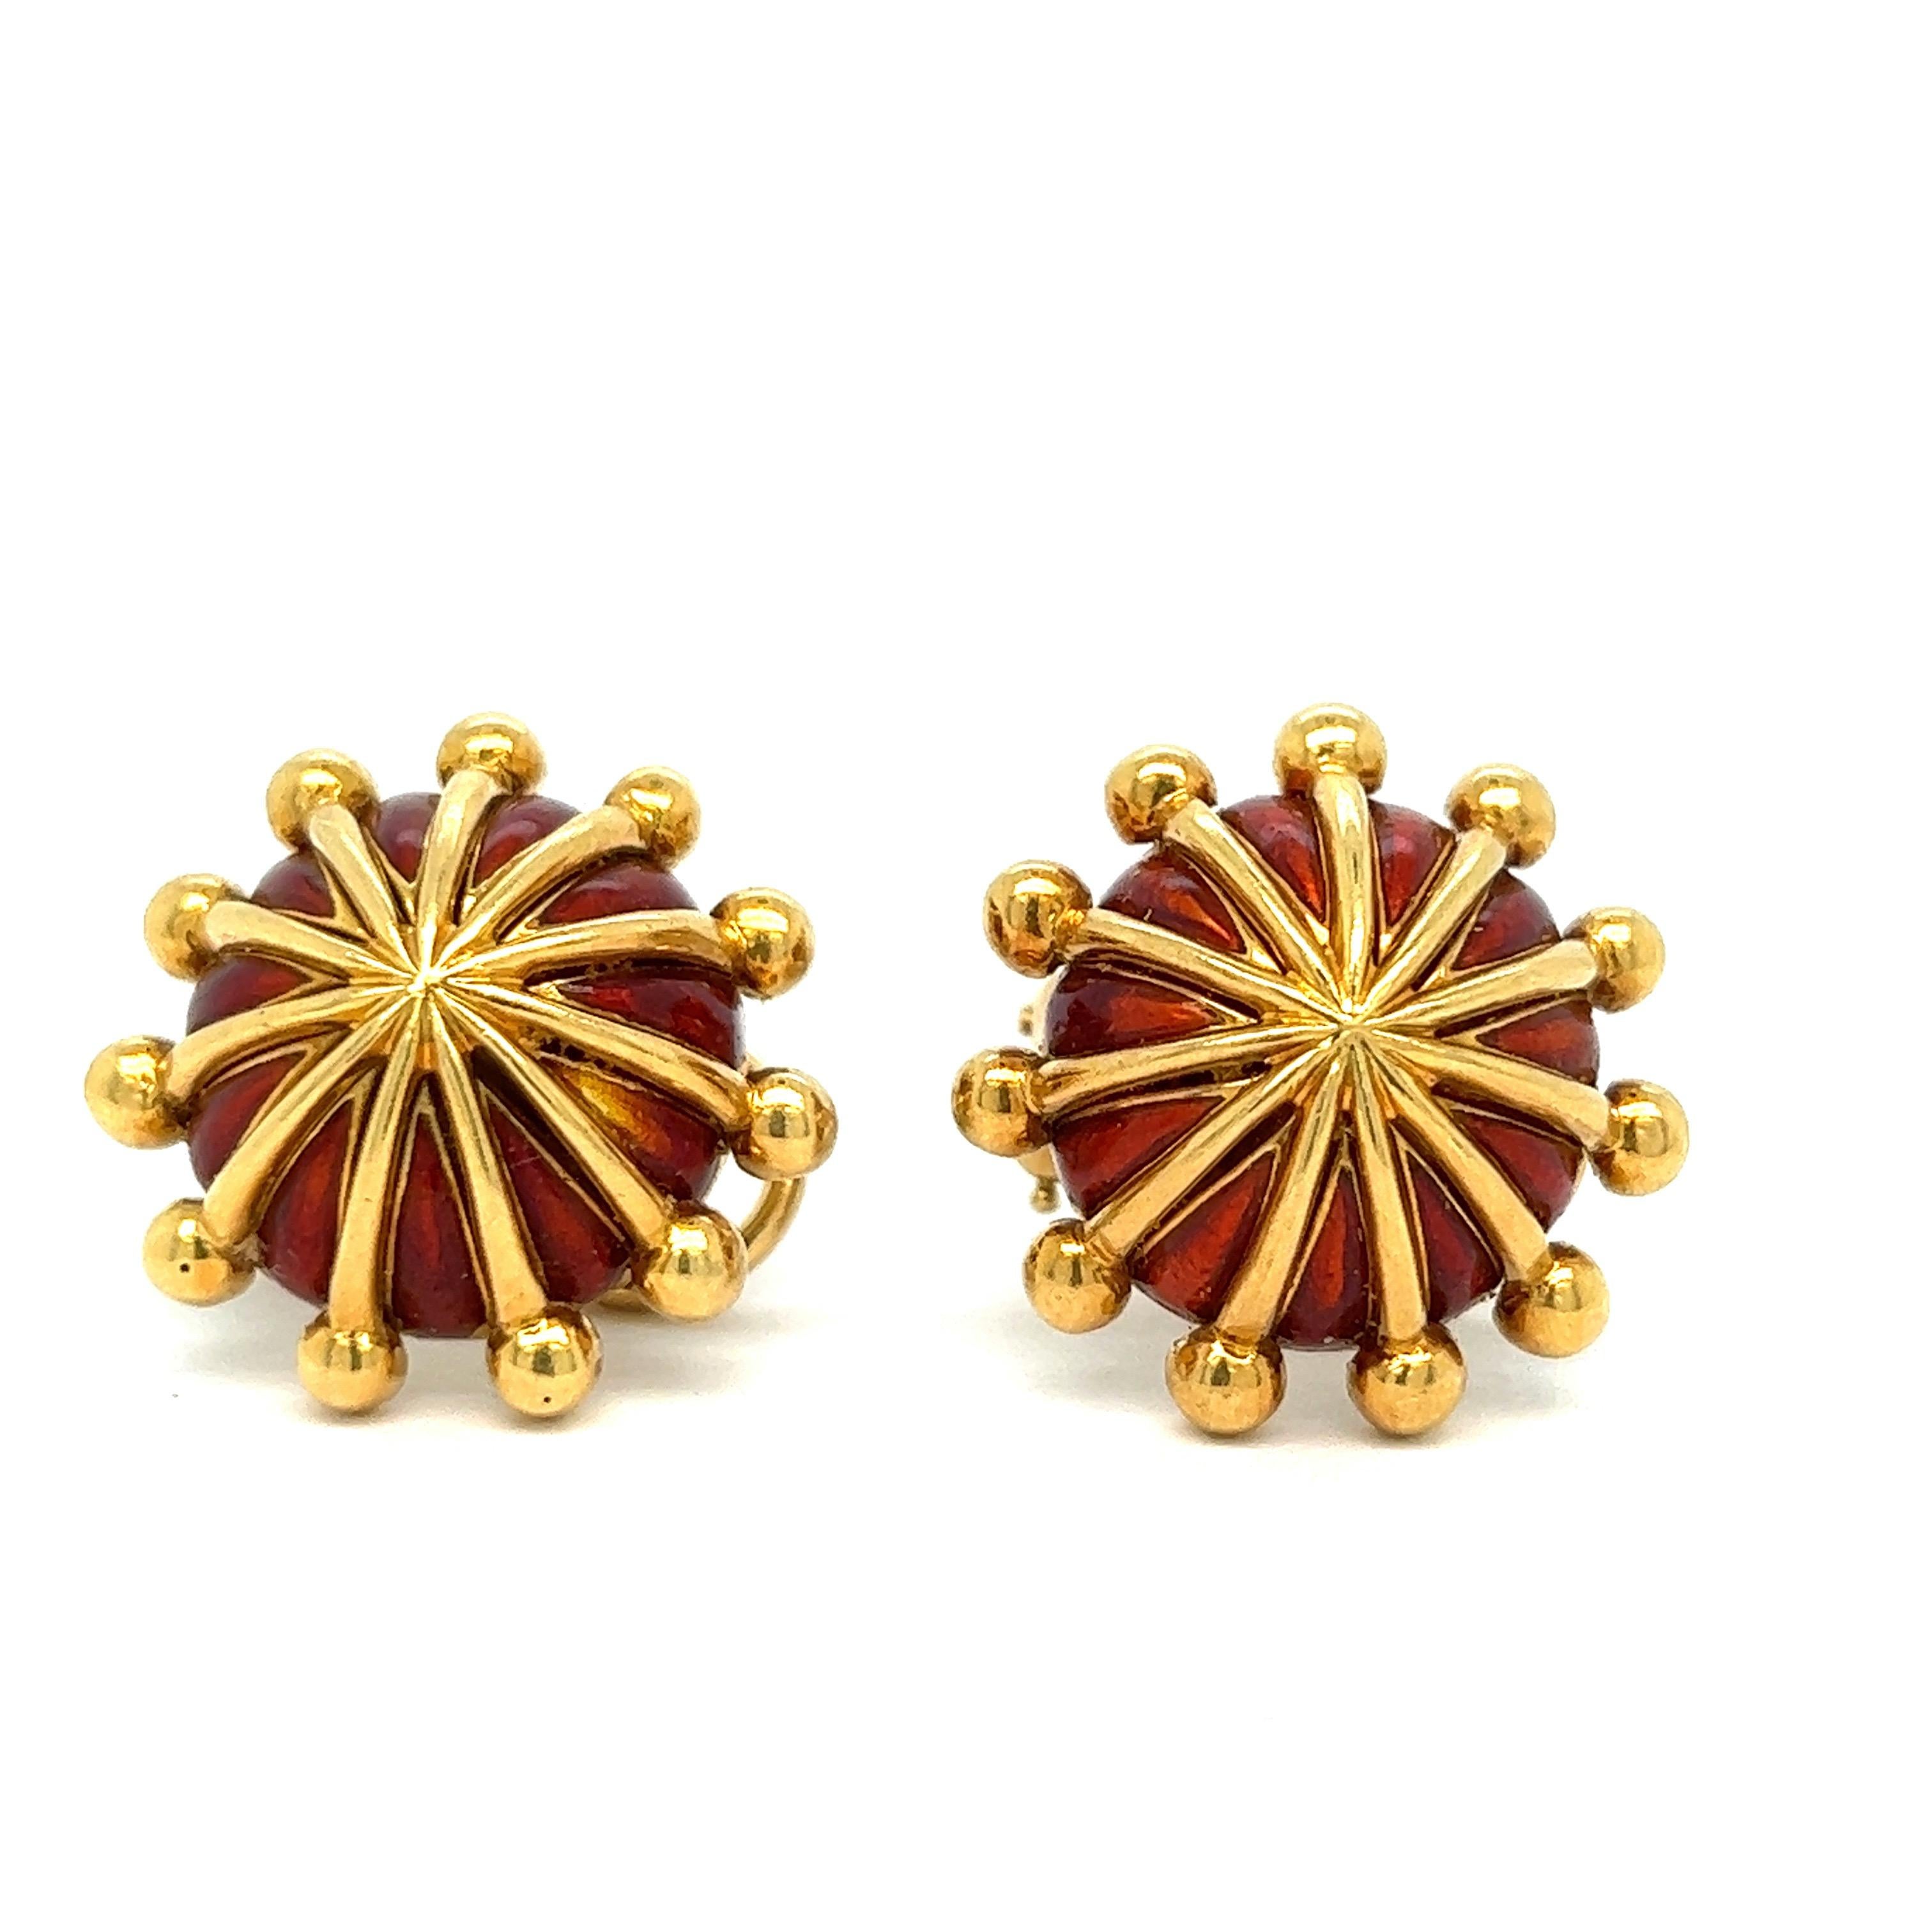 Pair of 18k yellow gold classic earrings, designed by Jean Schlumberger for Tiffany & Co, adorned with red enamel top. The earrings measure 0.75